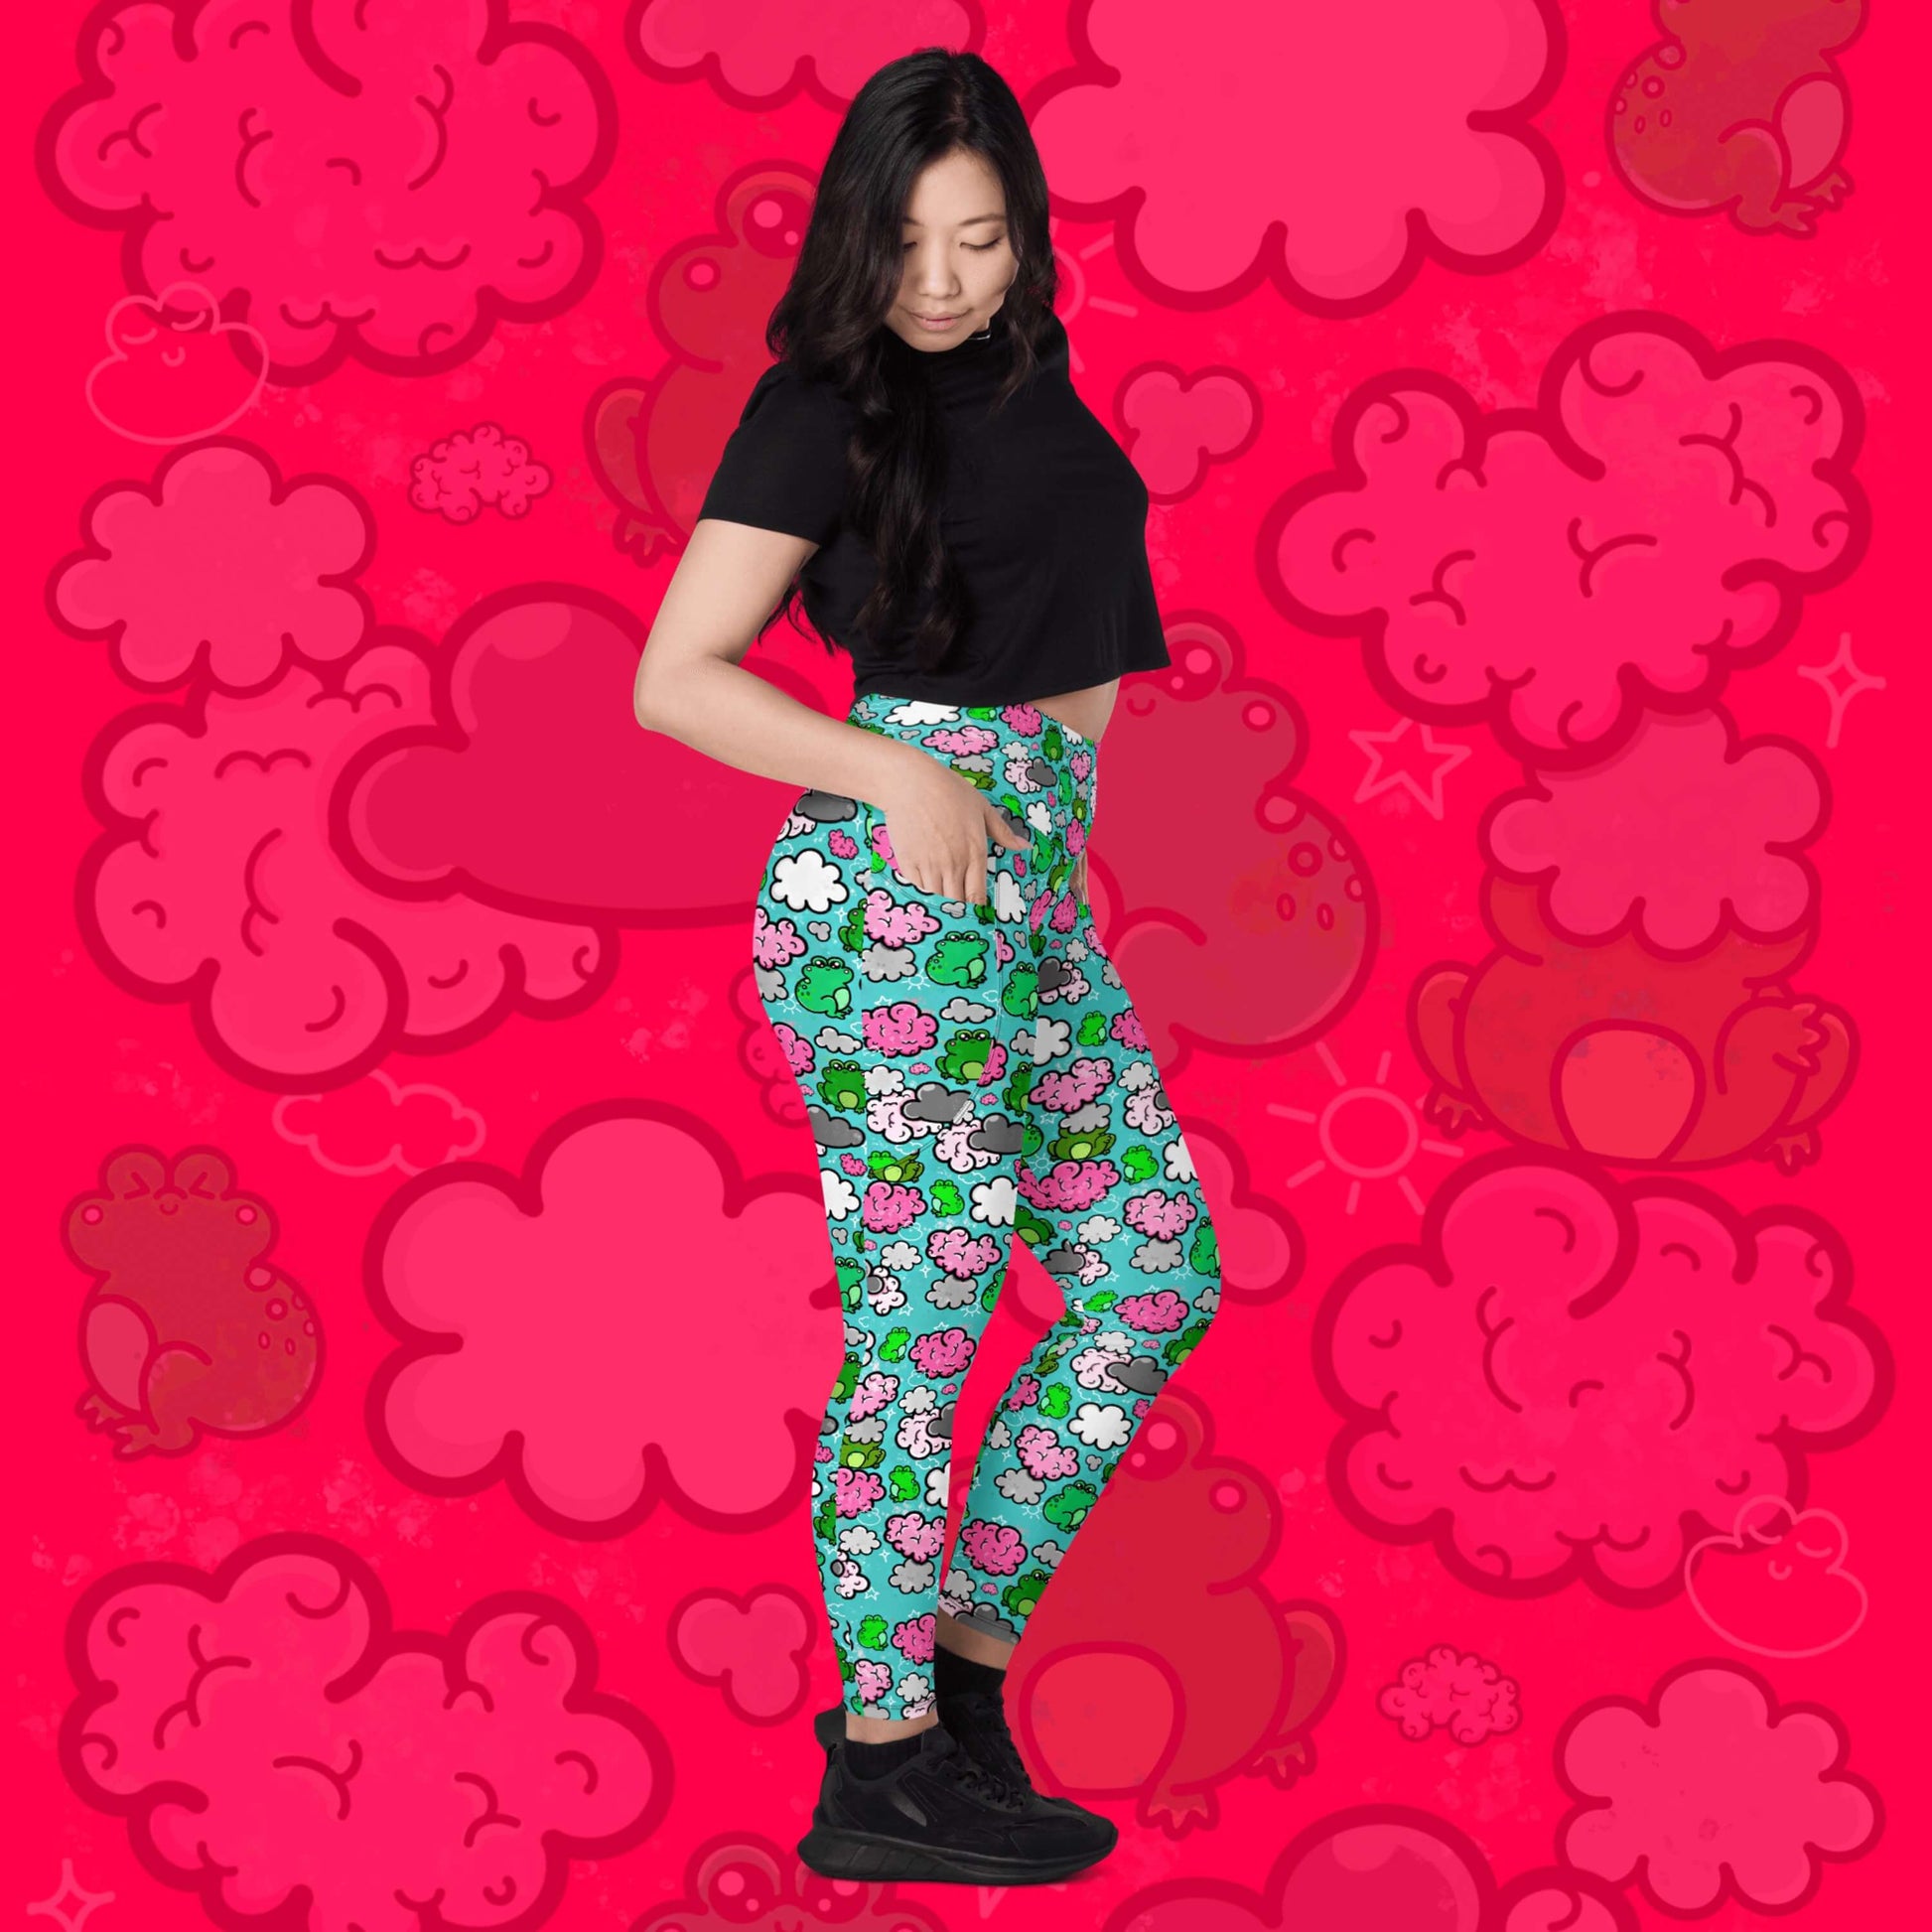 The Brain Frog Leggings with pockets - Brain Fog being worn by a model facing right with one leg bent, one hand in the pocket and looking down on a red background with a faded brain frog print. The leggings are an aqua blue base with various green kawaii face frogs with pink blush cheeks, pink brain style clouds, white and grey clouds and white sparkles all over. The design was created to raise awareness of Brain Fog.